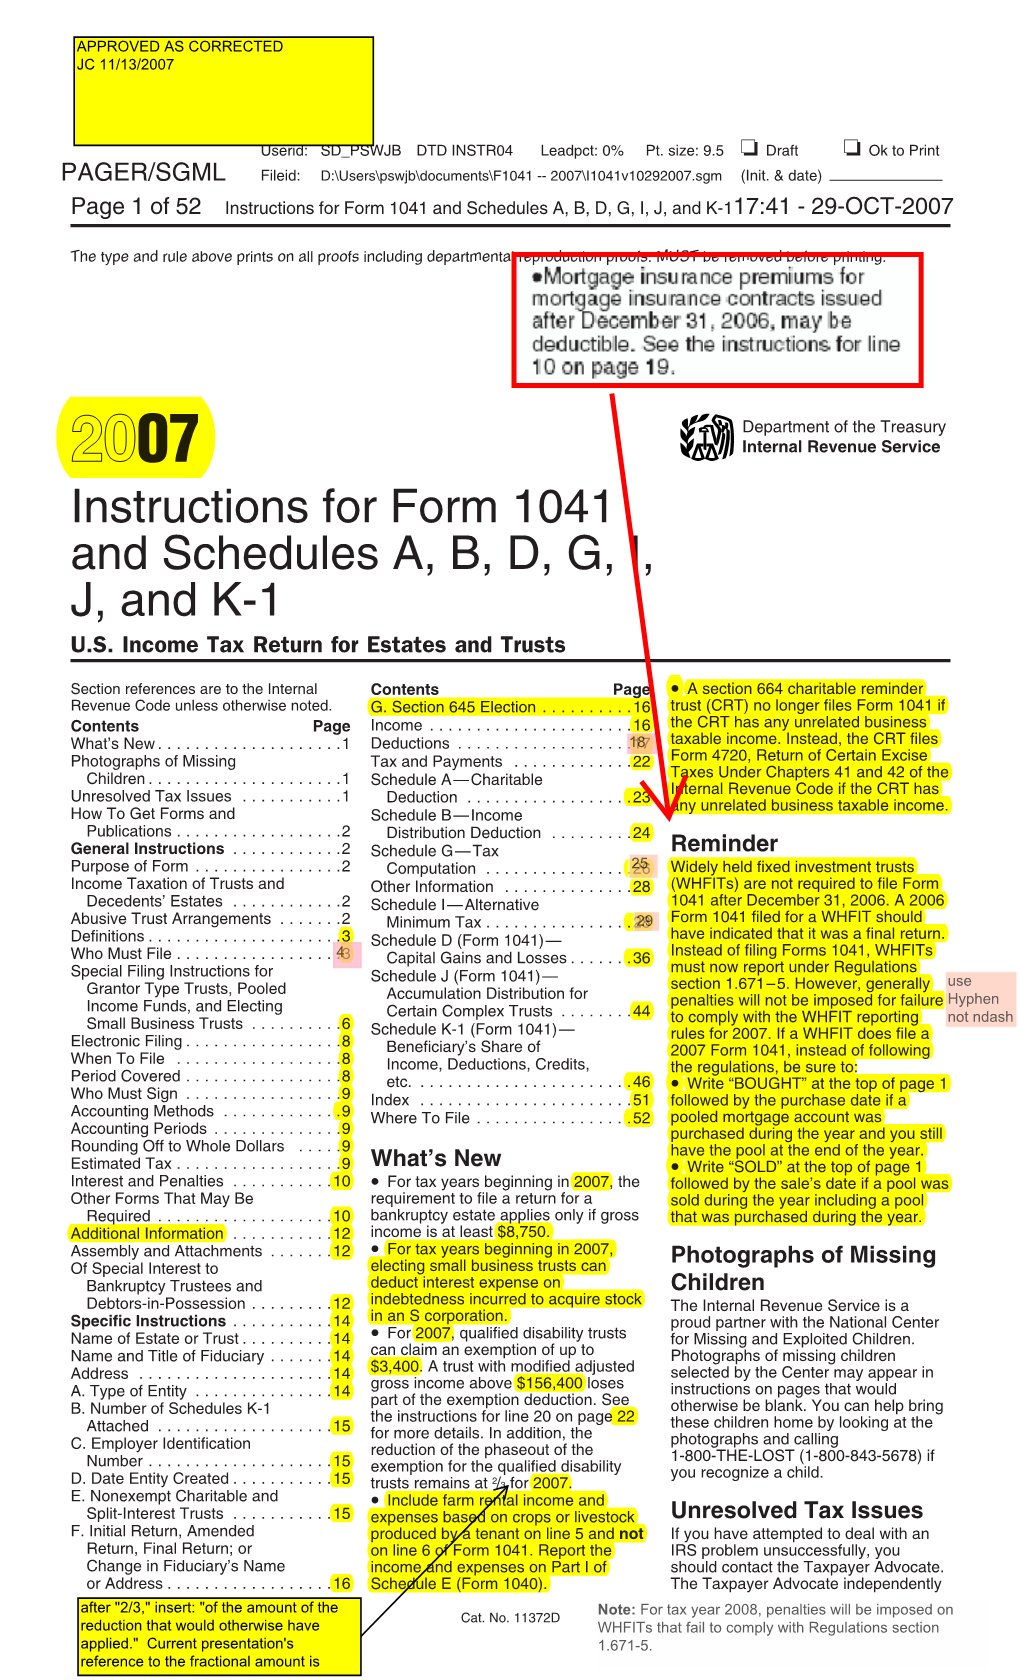 Major Changes to the 2007 Instructions for Form 1041